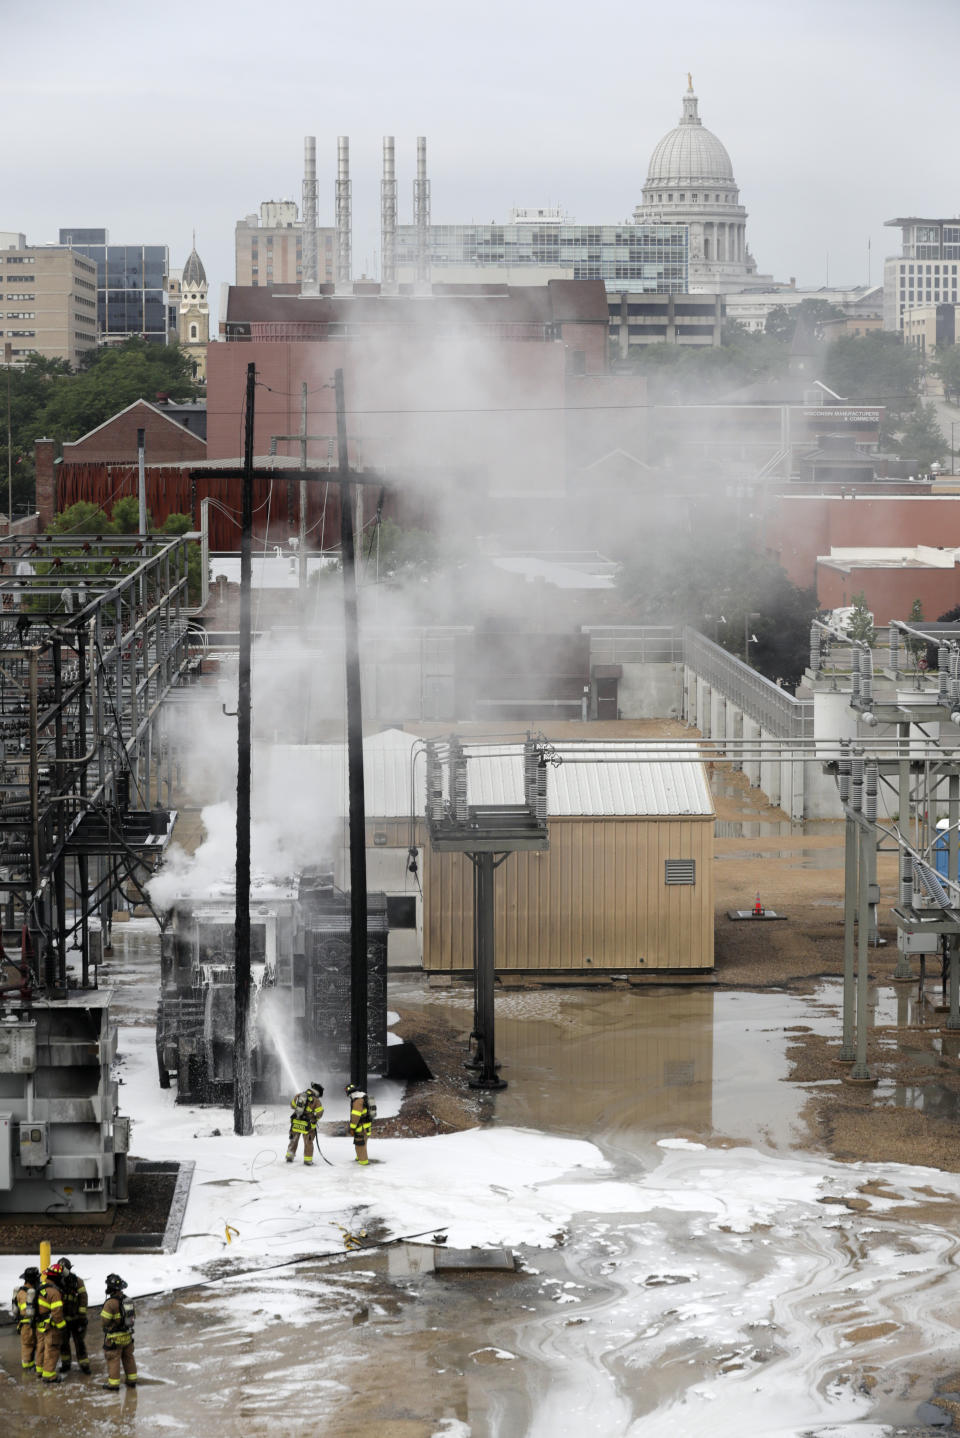 Madison Fire department respond at the scene of a fire at Madison Gas and Electric, Friday, July 19, 2019 in Madison, Wis. (Steve Apps/Wisconsin State Journal via AP)